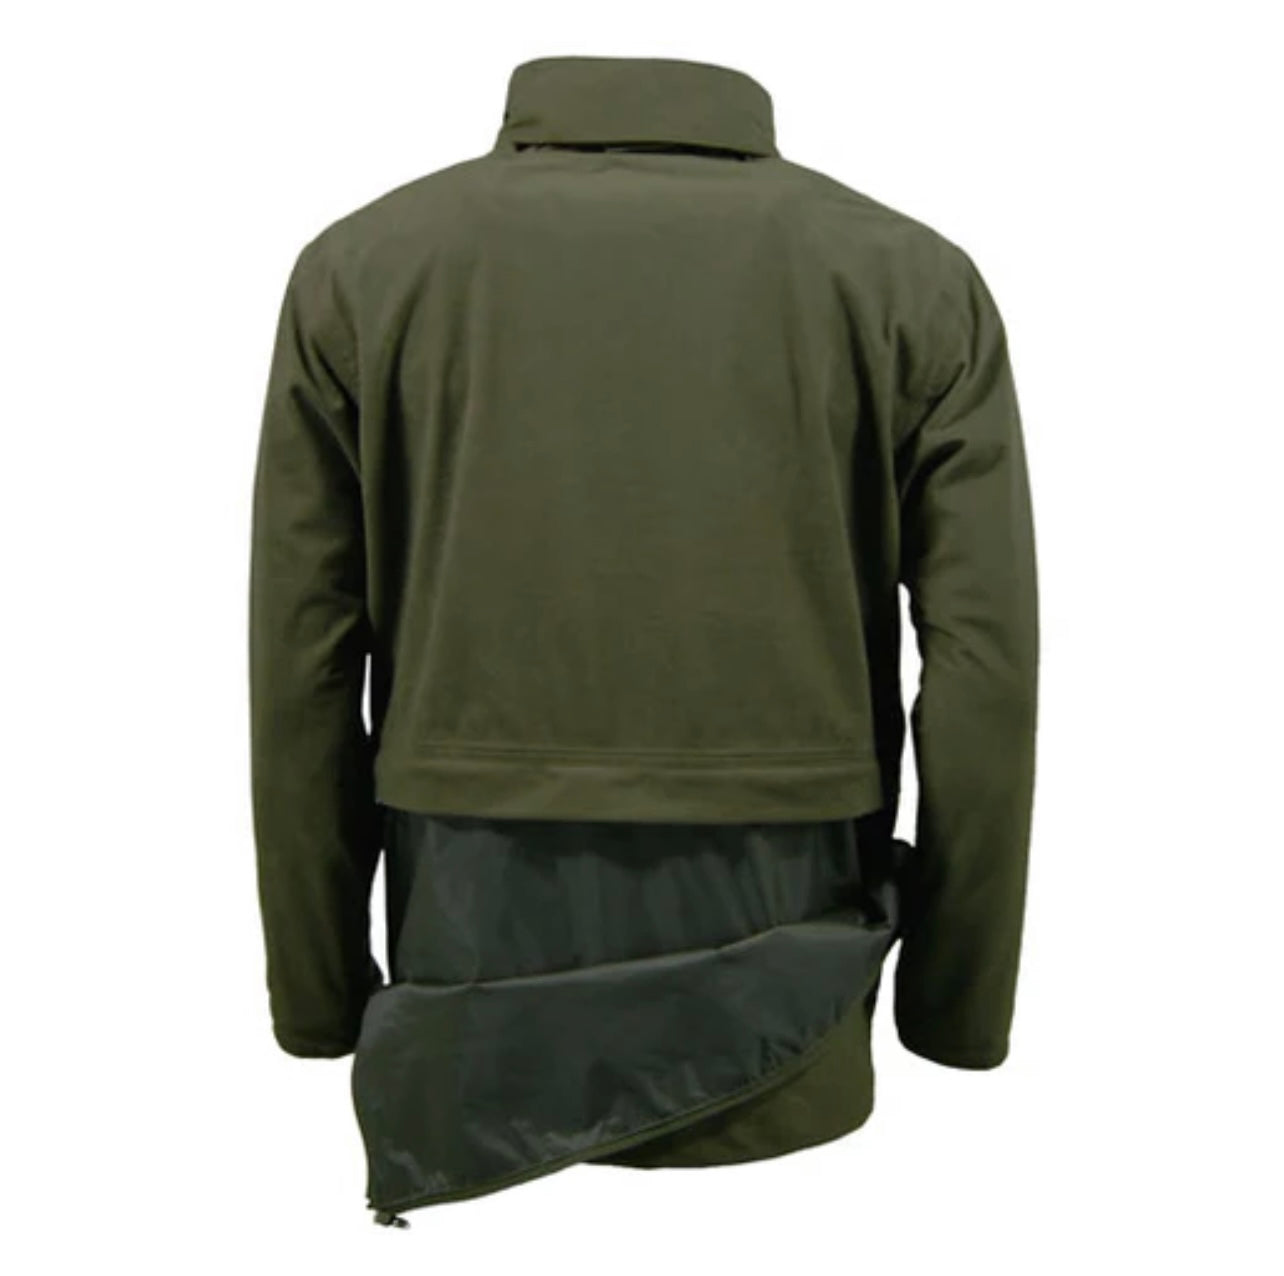 Game Stealth Jacket (Green)